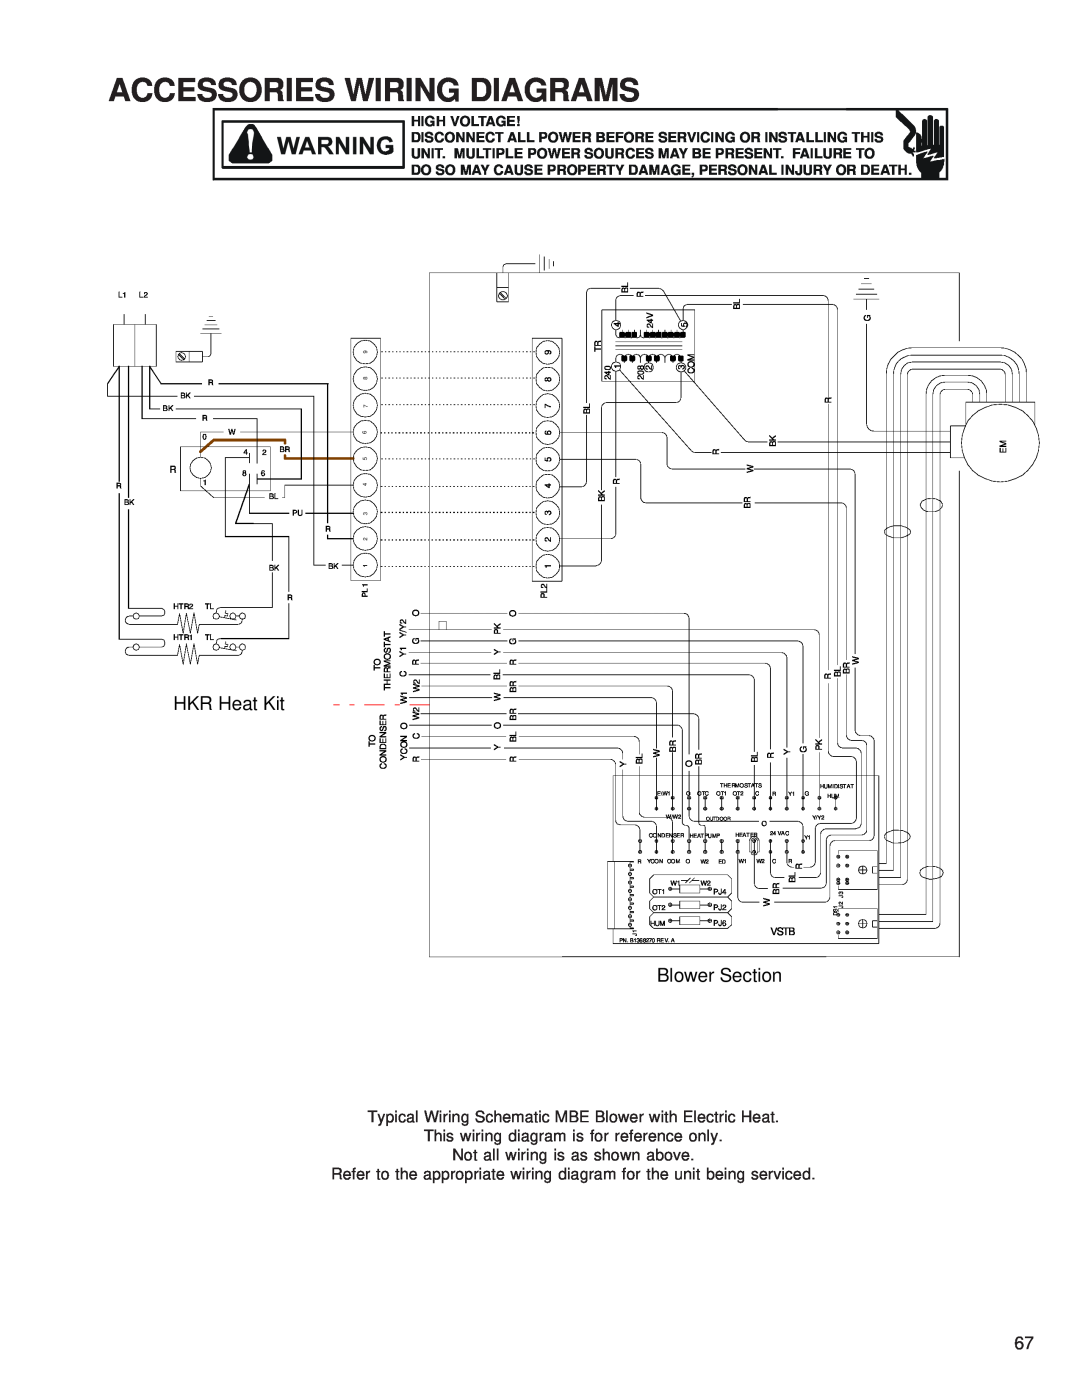 Goodman Mfg RT6100004R13 manual Accessories Wiring Diagrams, HKR Heat Kit, Blower Section, Not all wiring is as shown above 